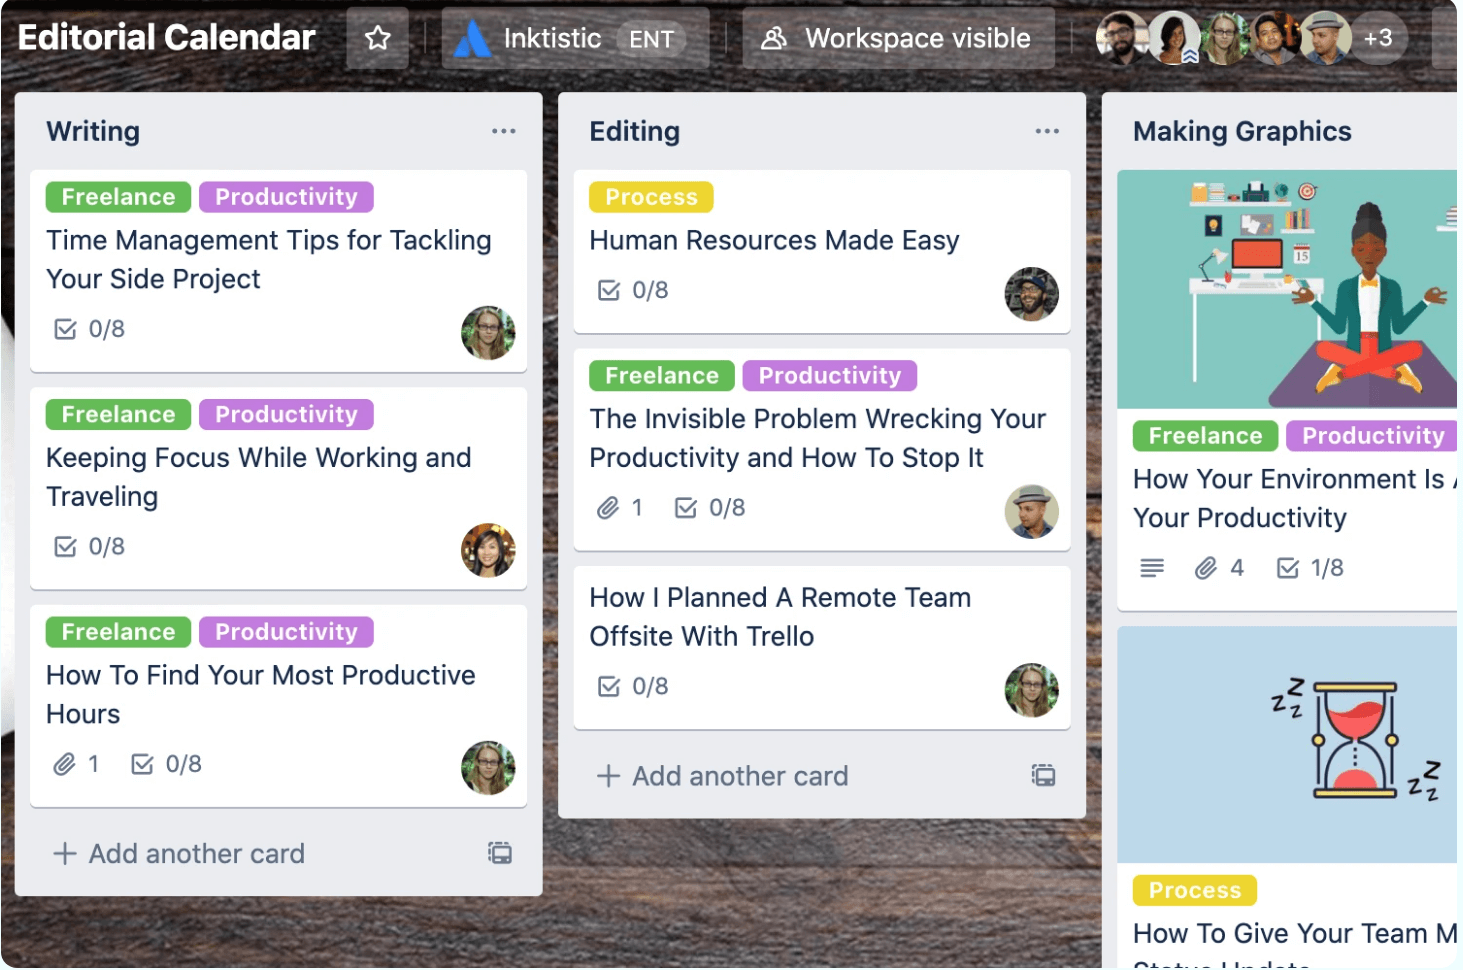 Kanban style editorial calendar in Trello, with columns for writing, editing and makeing graphics